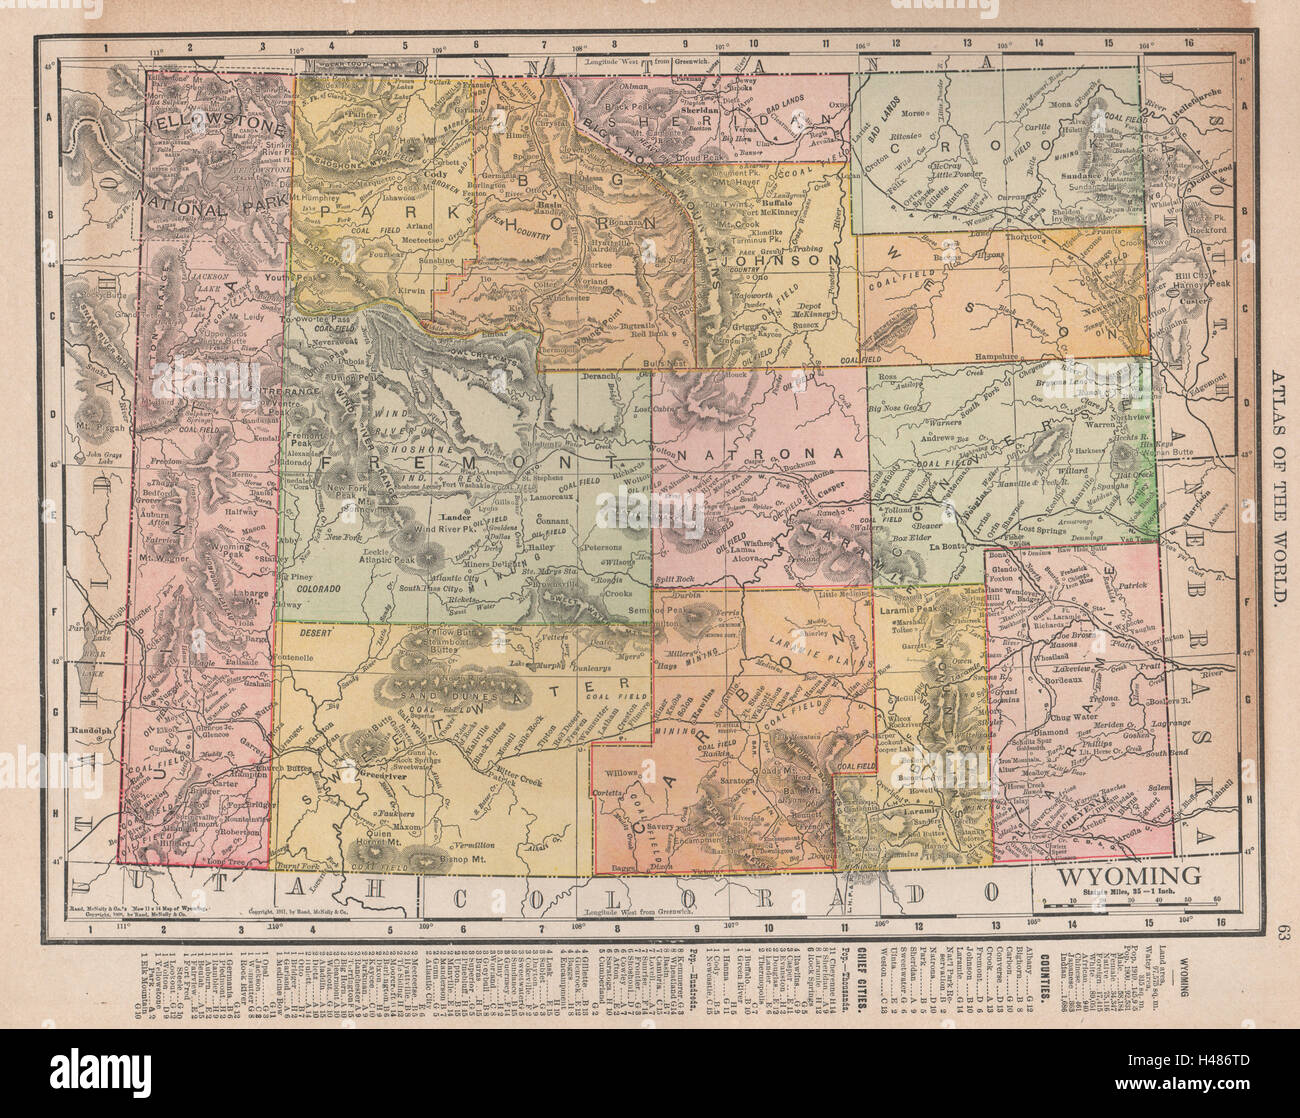 Wyoming state map showing counties. Yellowstone. RAND MCNALLY 1912 old Stock Photo